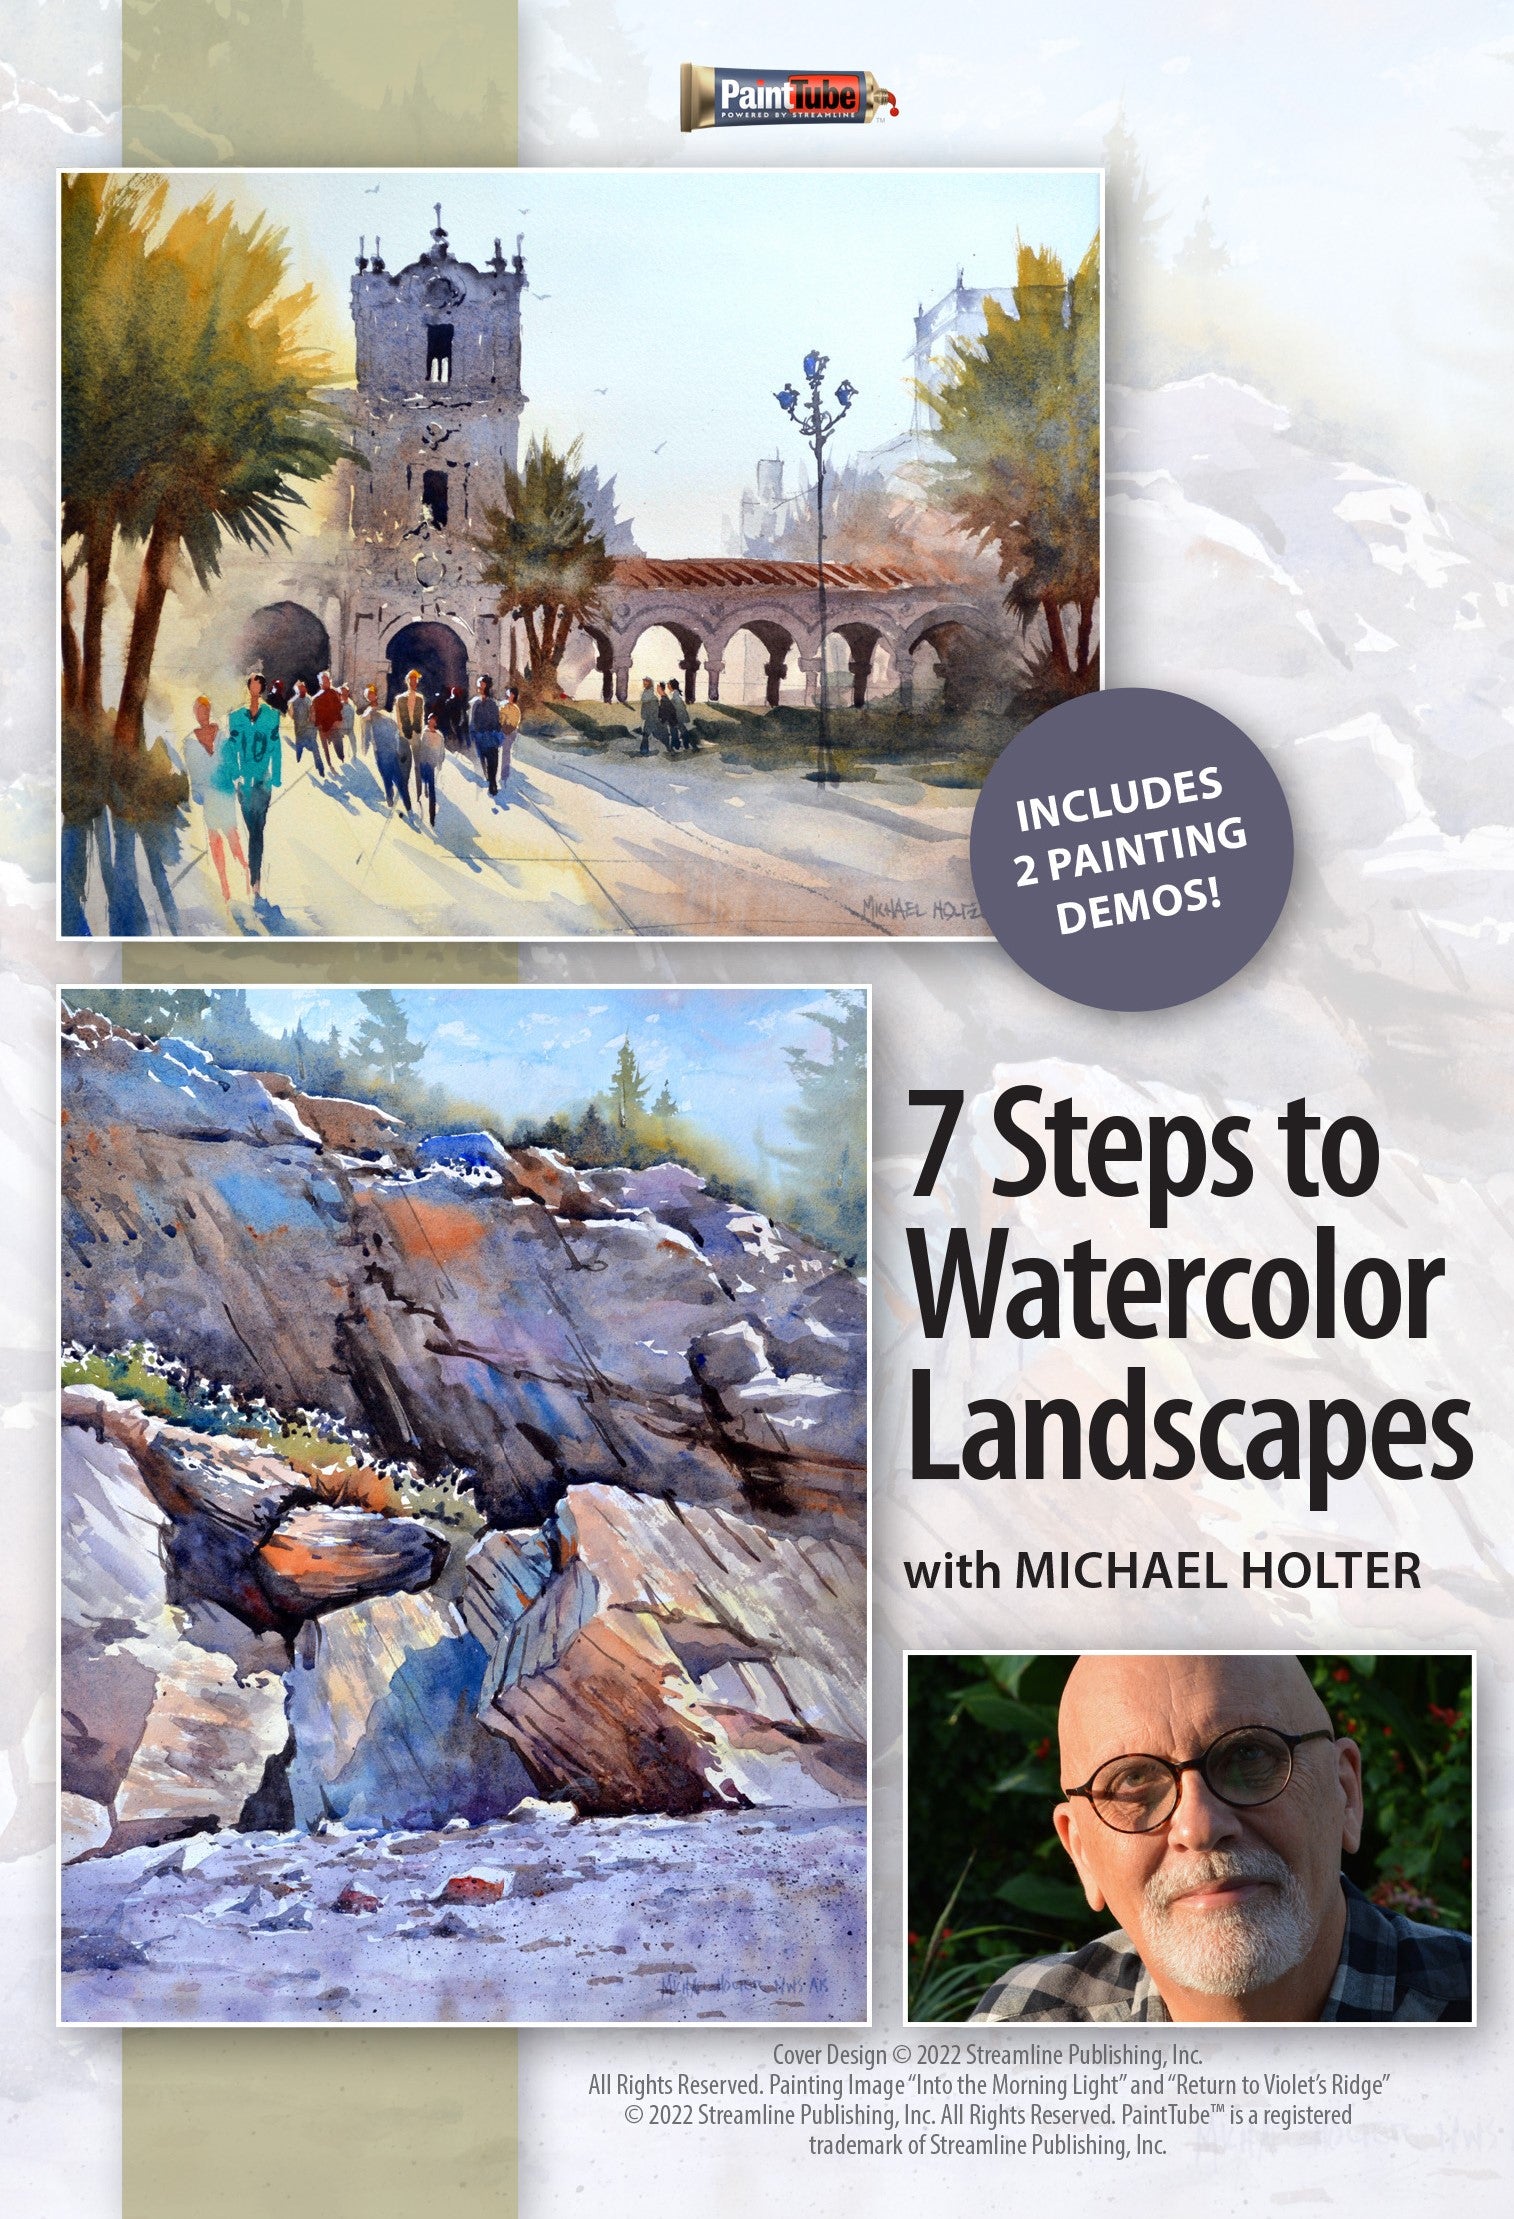 Michael Holter: 7 Steps to Watercolor Landscapes